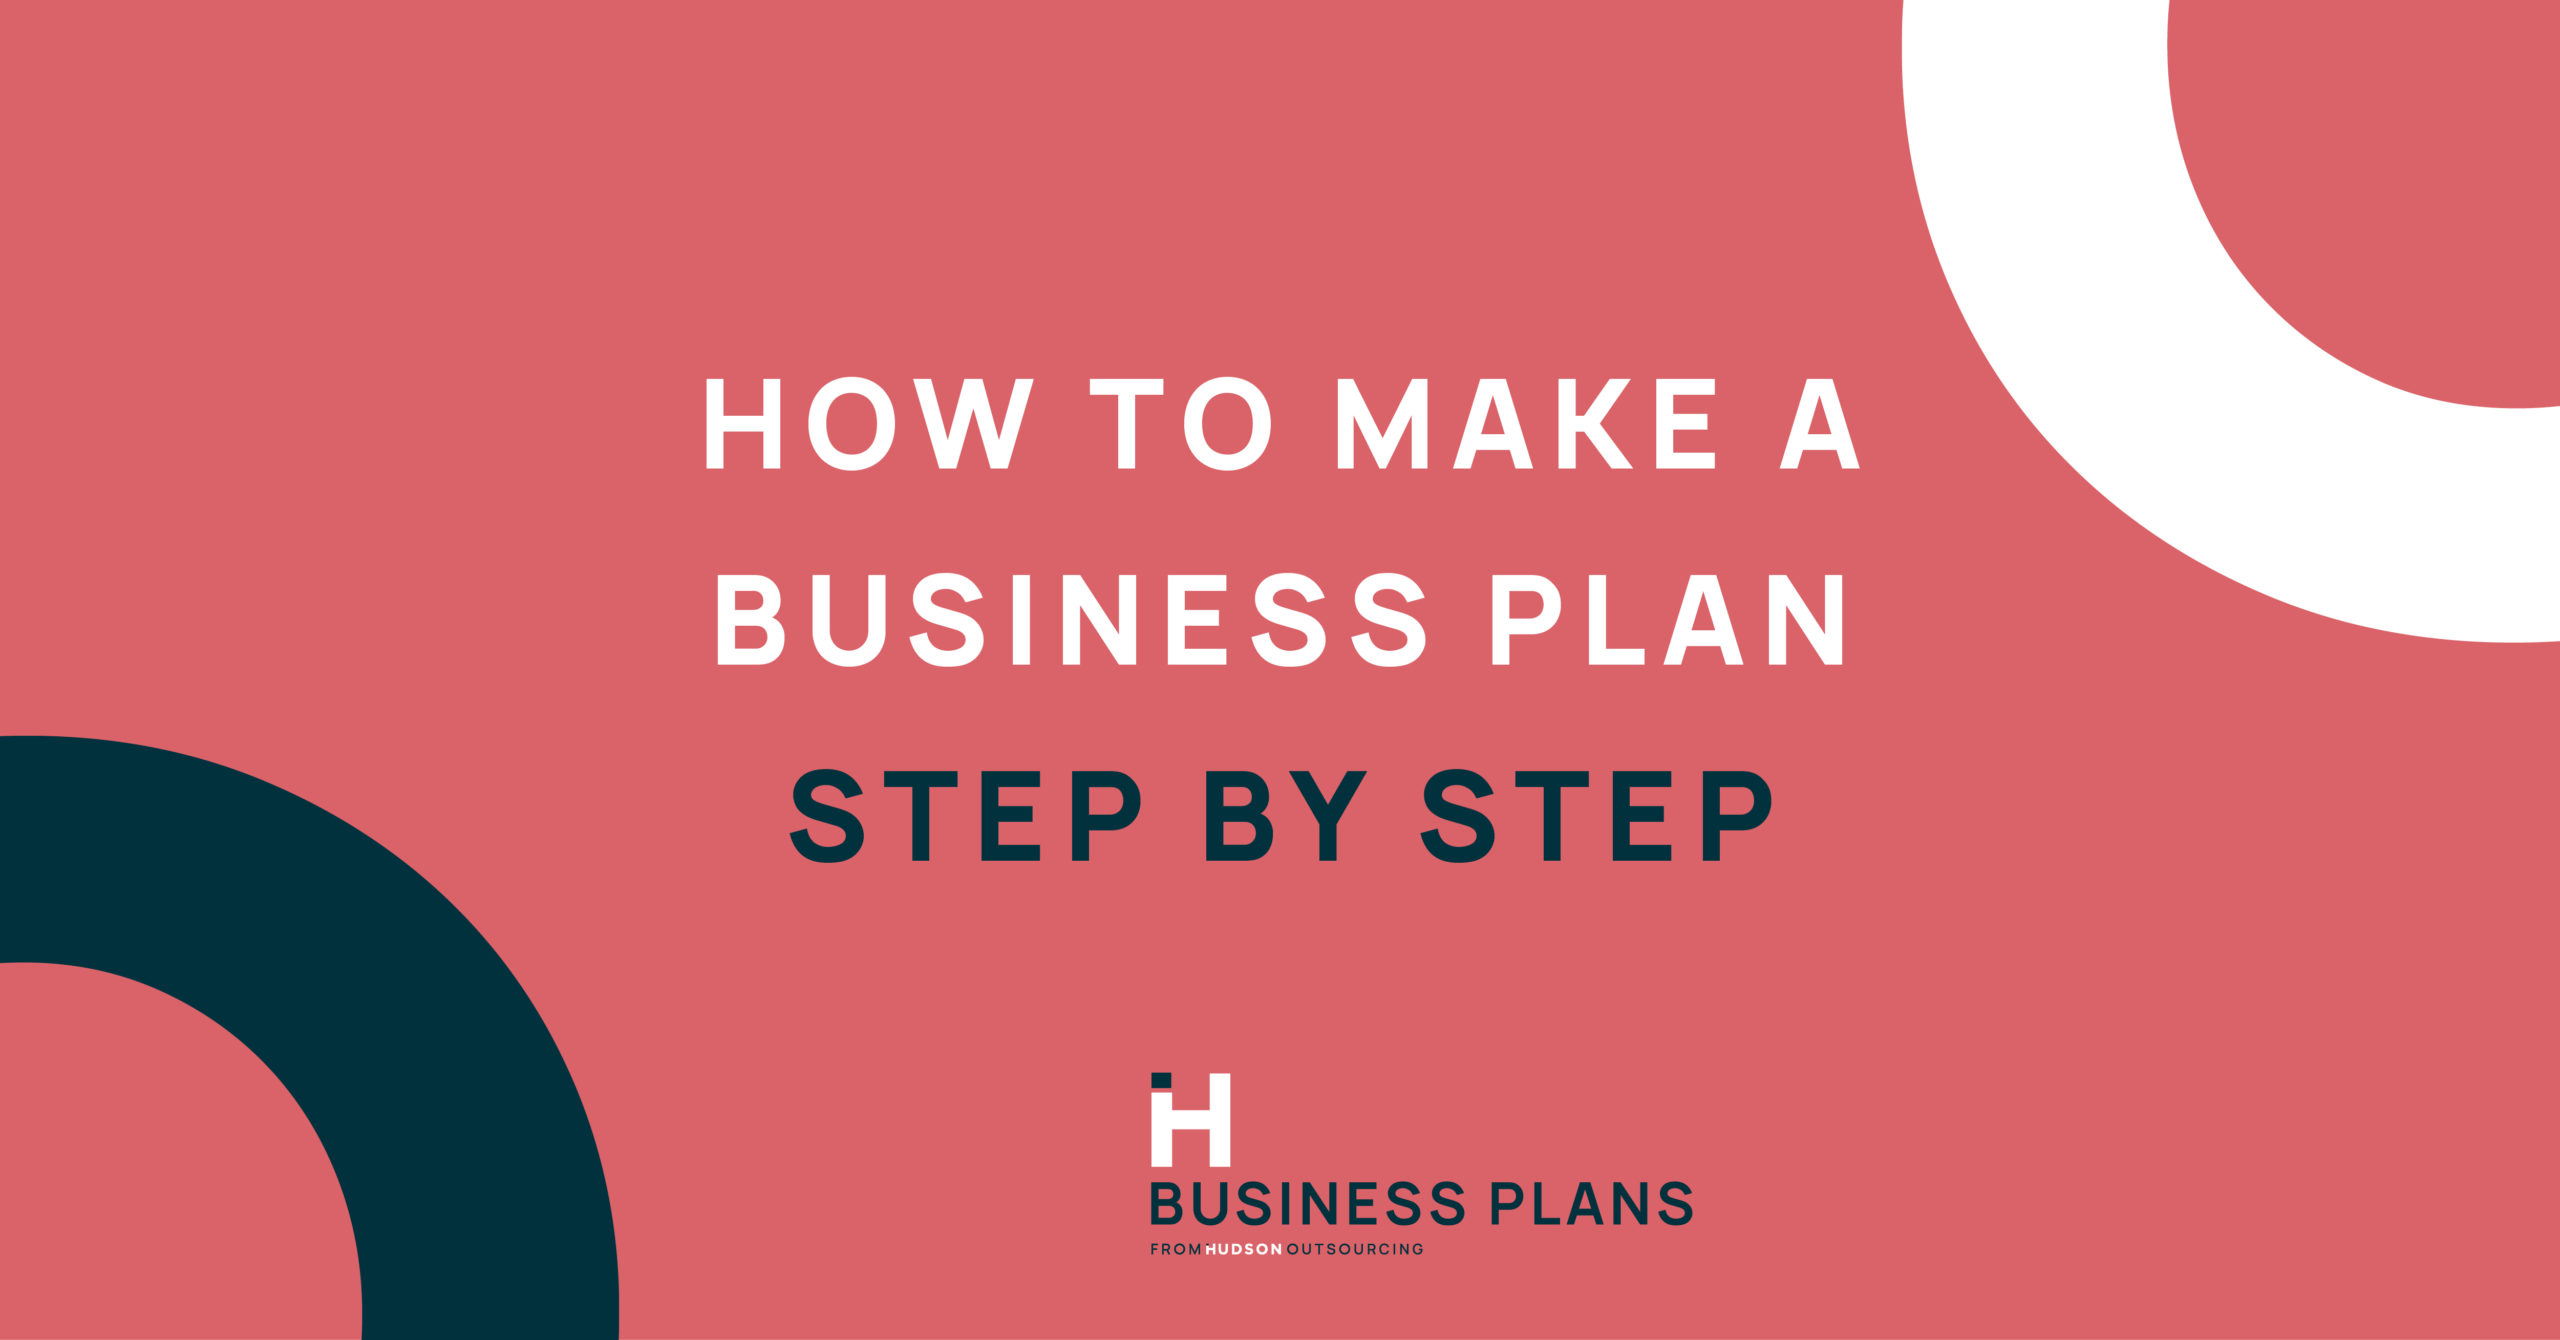 How to Make a Business Plan Step by Step